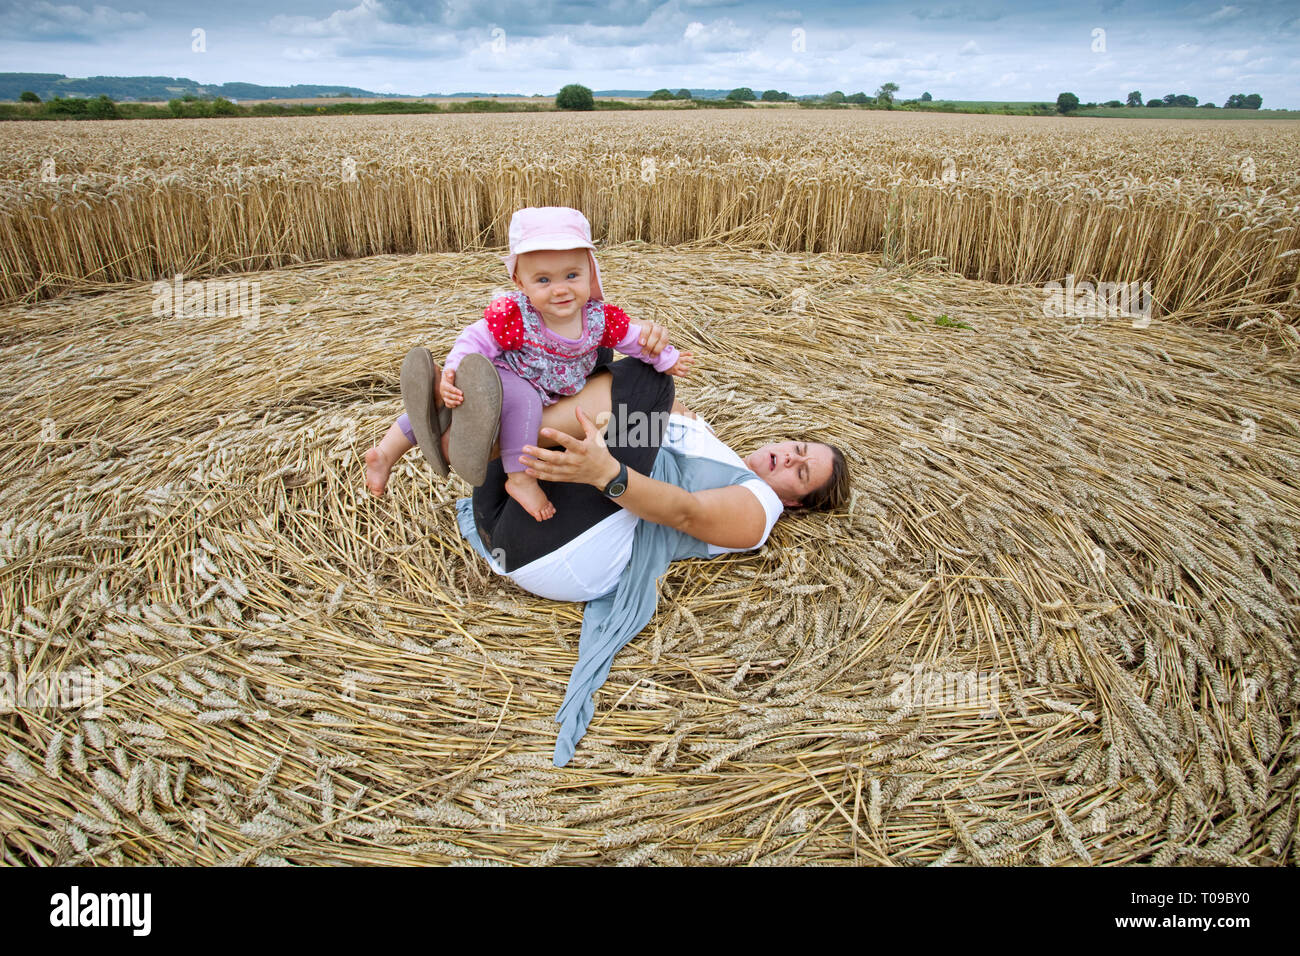 Great Britain, England, Gloucestershire.  Mother and baby enjoy a crop circle formation on the Severn Estuary, July 2010. MR. Stock Photo